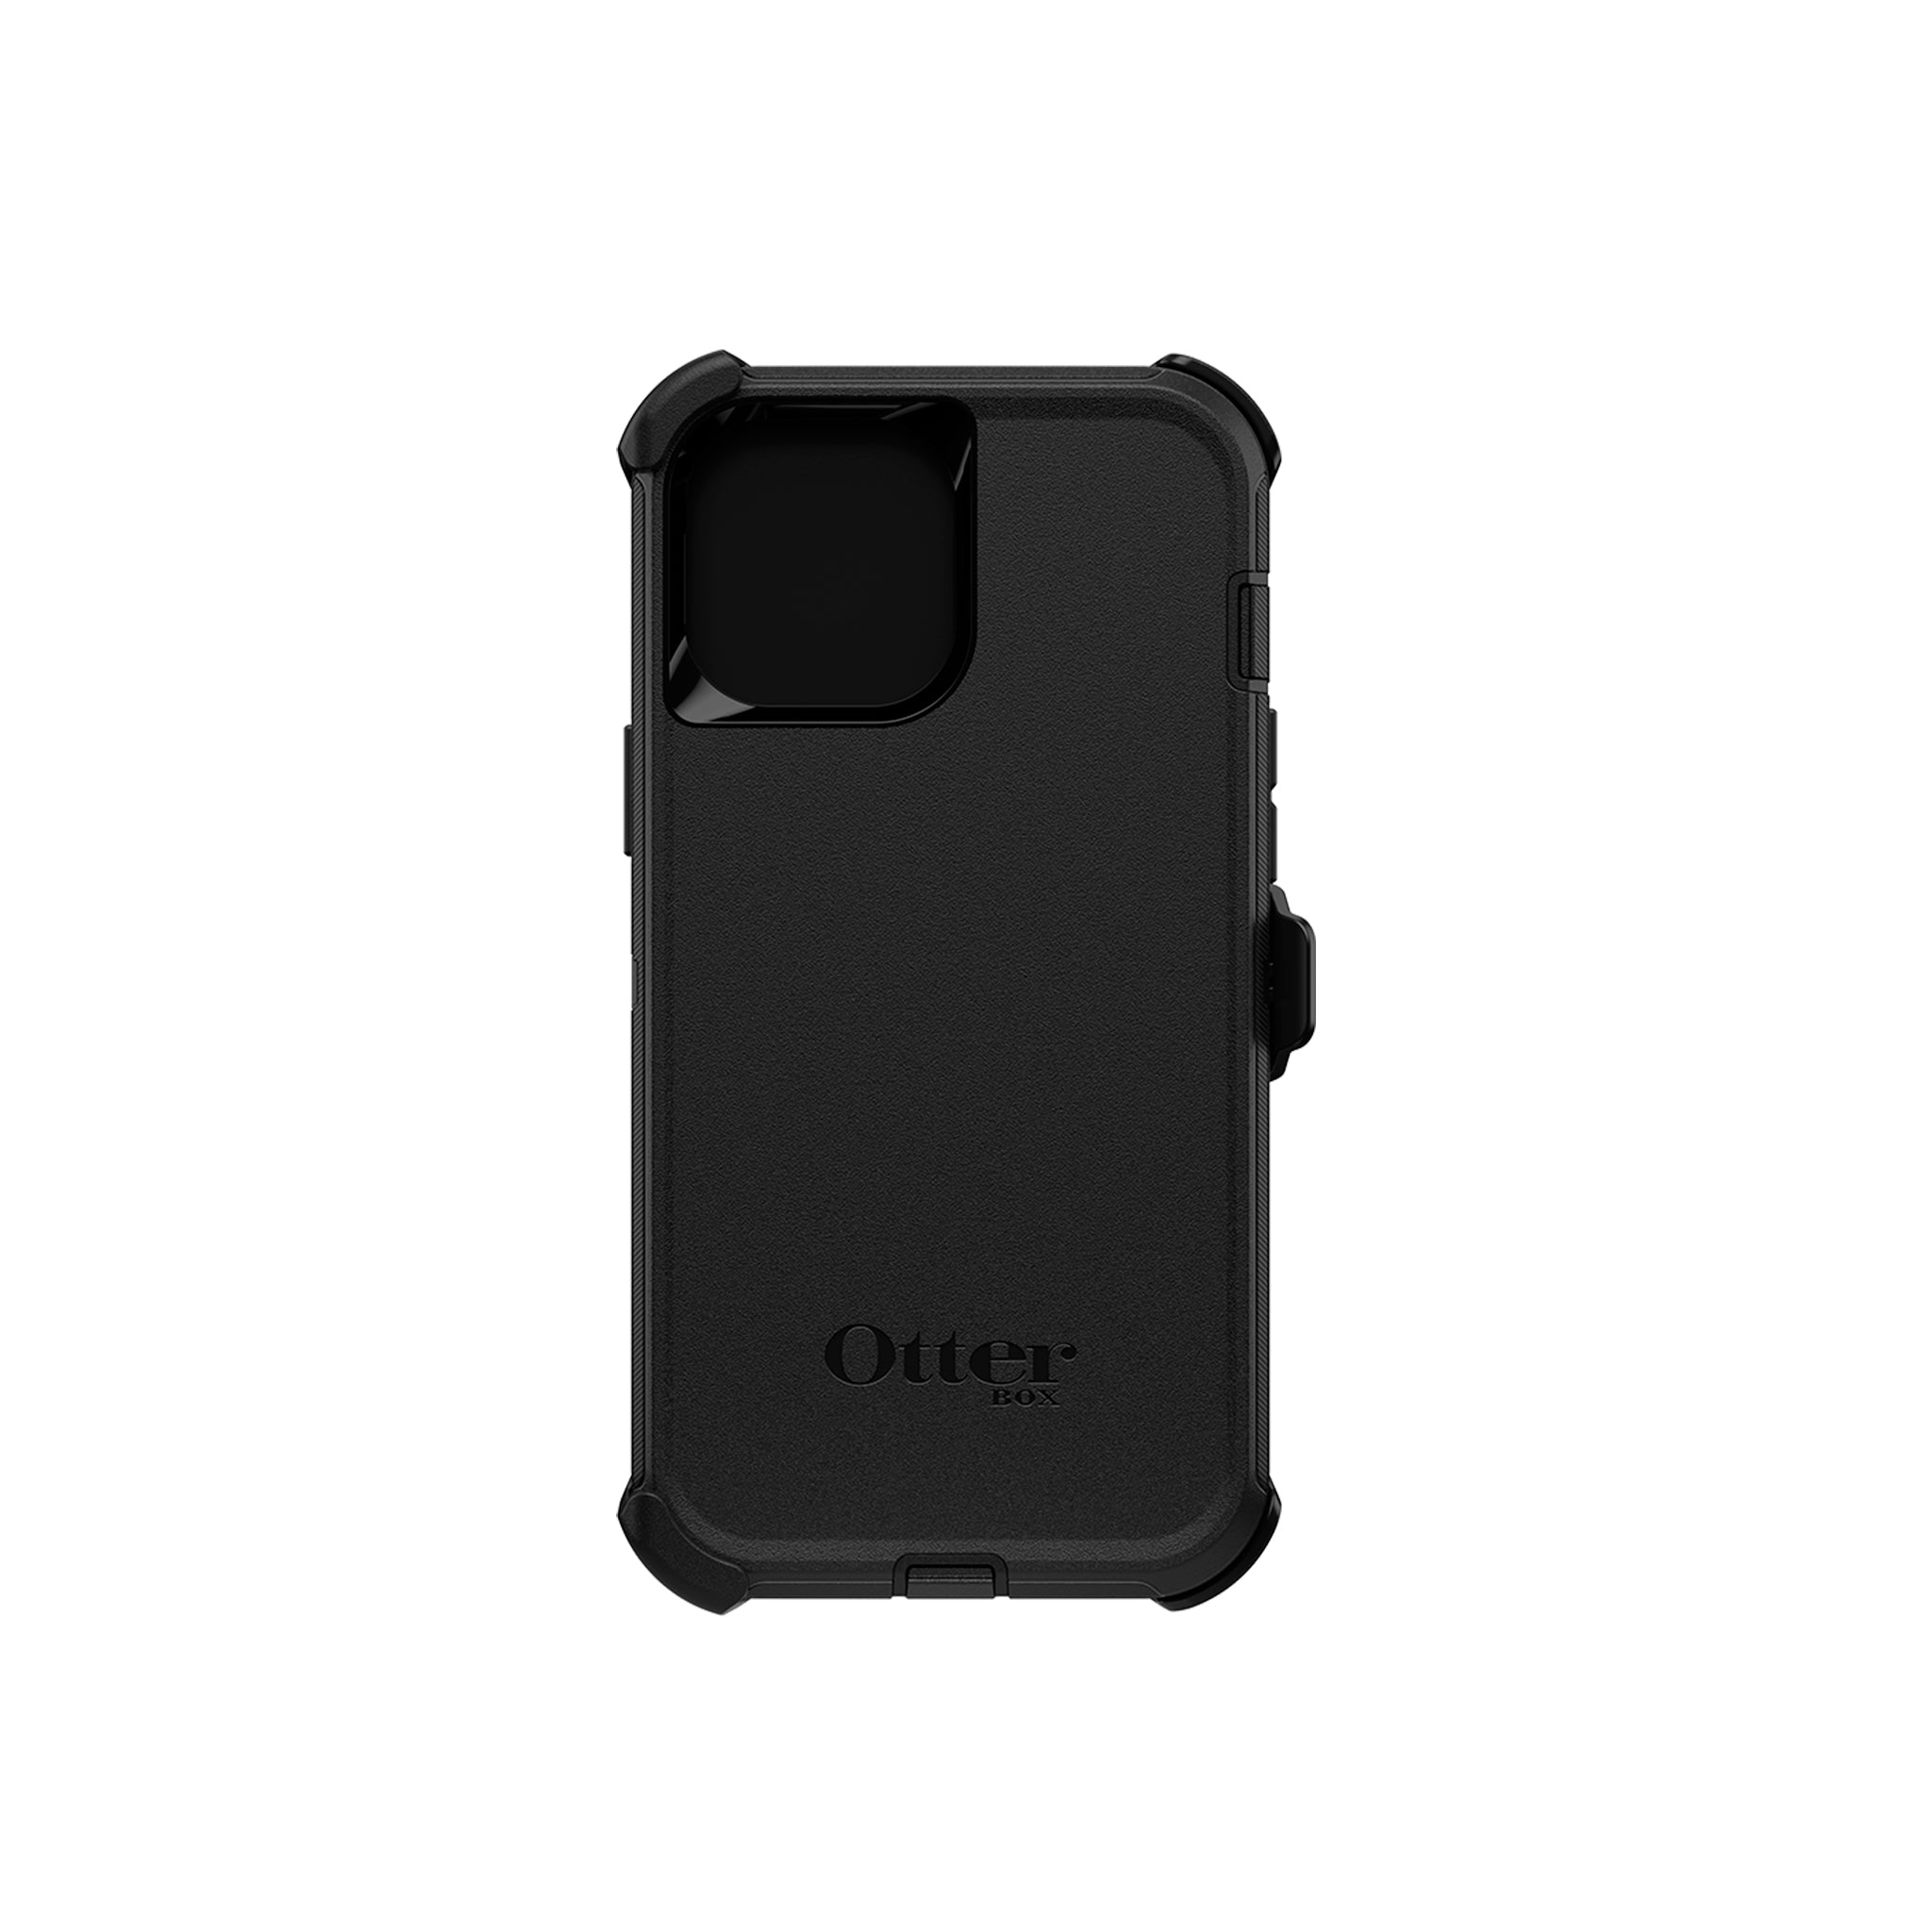 OtterBox - Defender for iPhone 12 Pro Max - Black